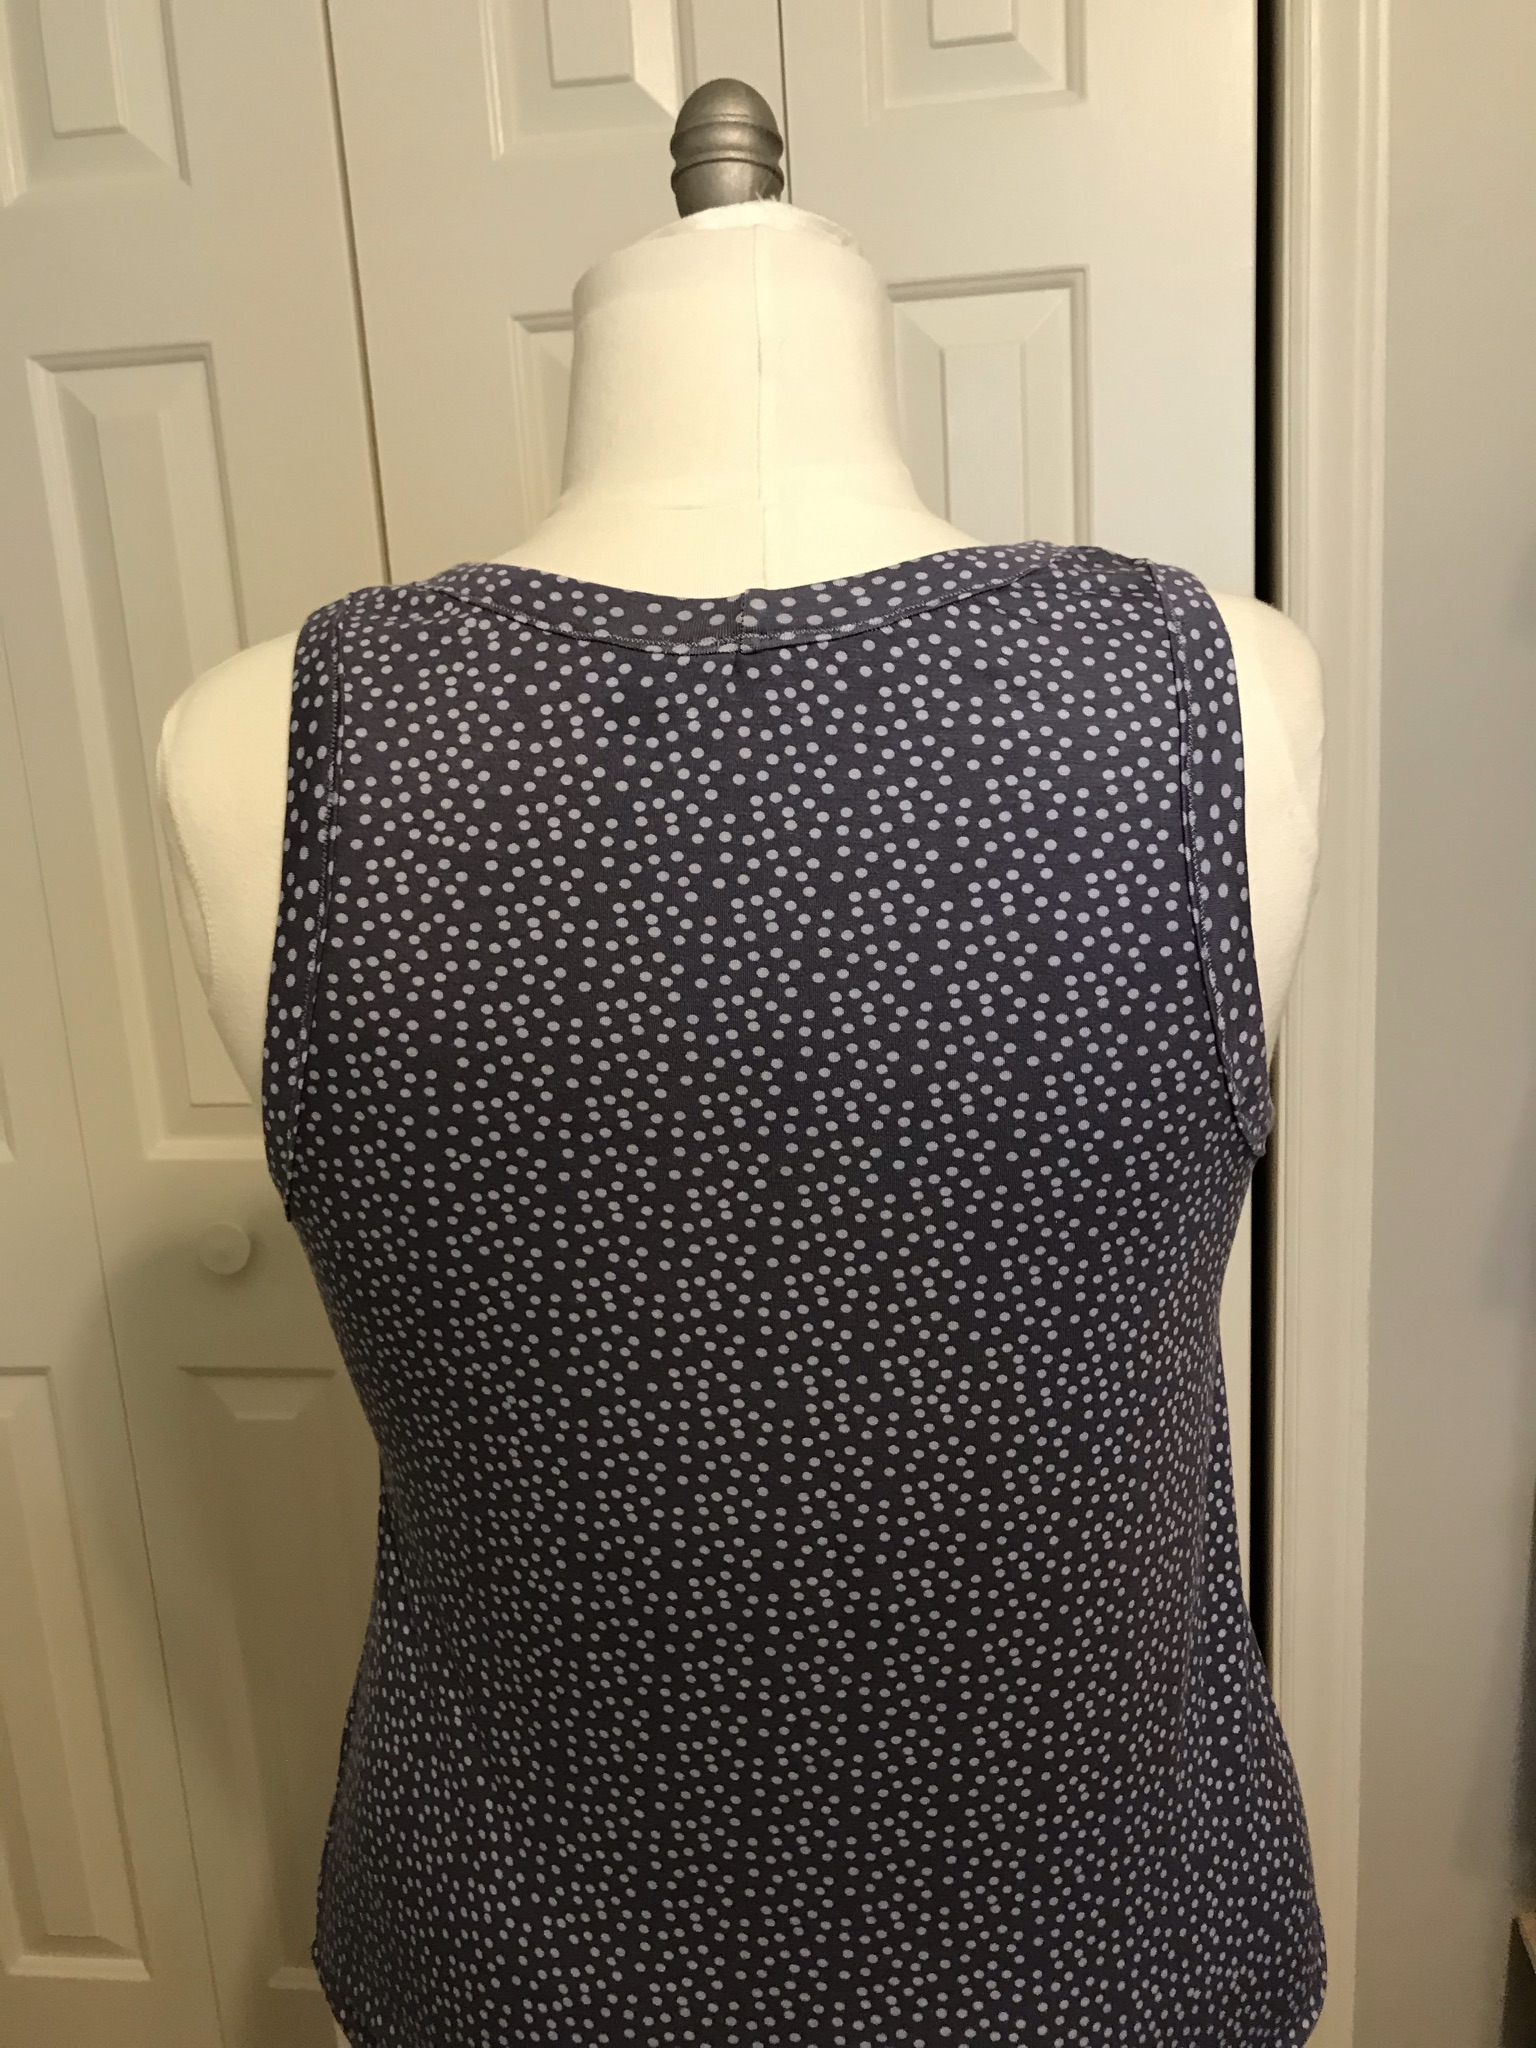 More Blomma Tank and a Blomma Dress! – Alice Sews